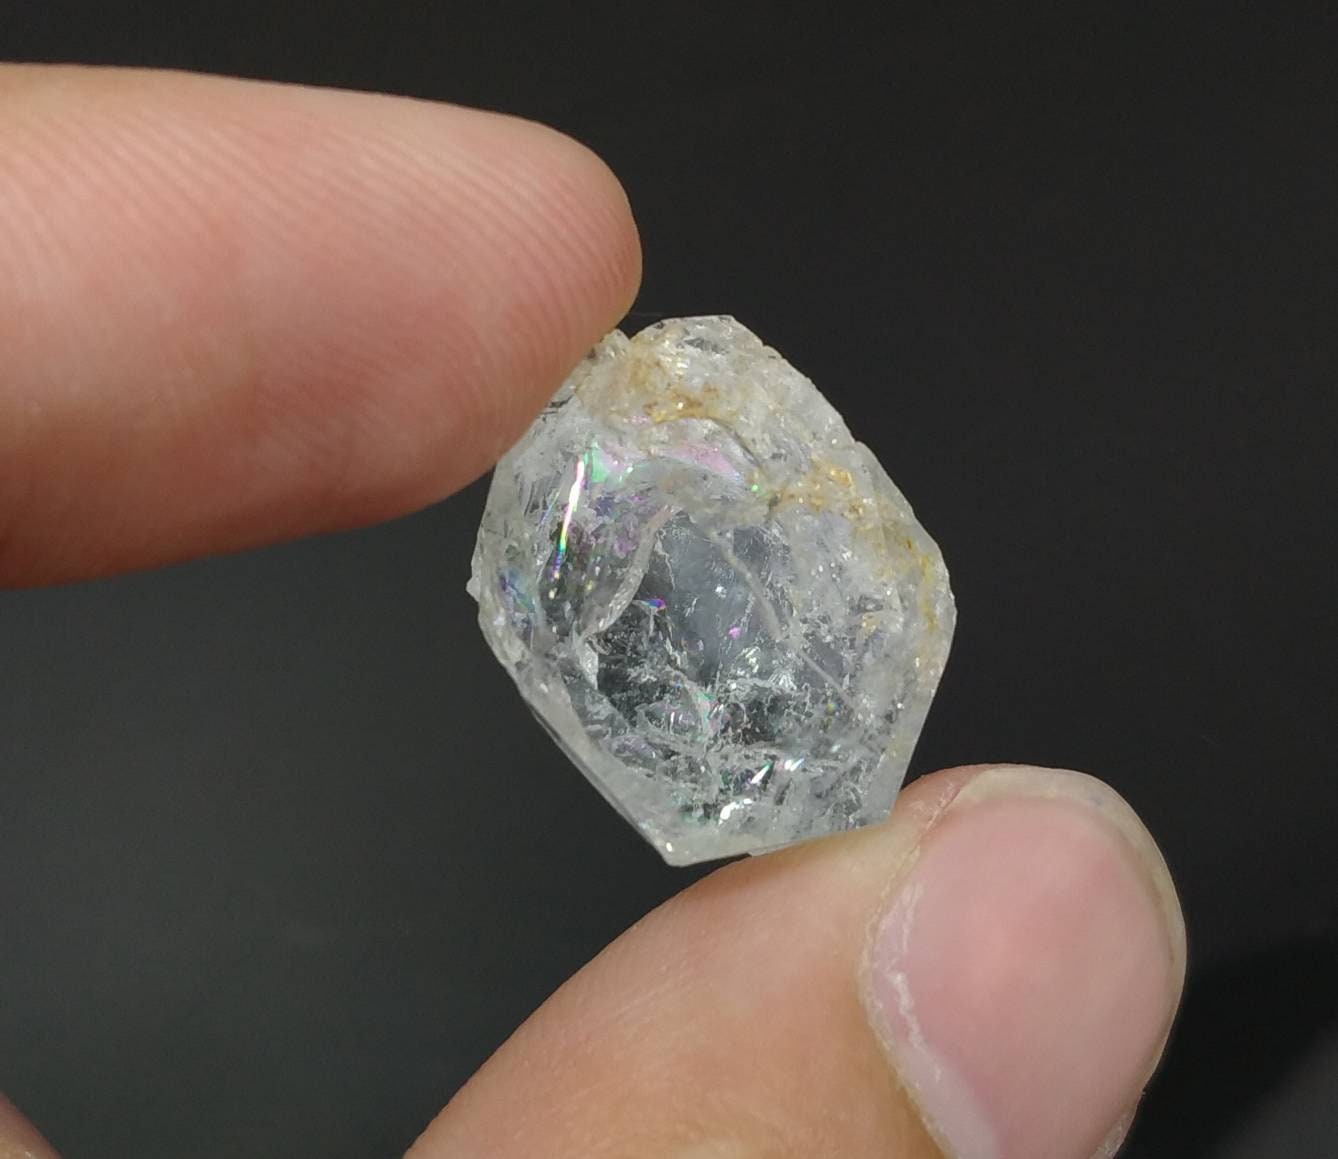 ARSAA GEMS AND MINERALSEtched gemmy clear transparent white Beryl crystal from Skardu GilgitBaltistan Pakistan, weight 6.3 grams - Premium  from ARSAA GEMS AND MINERALS - Just $33.00! Shop now at ARSAA GEMS AND MINERALS